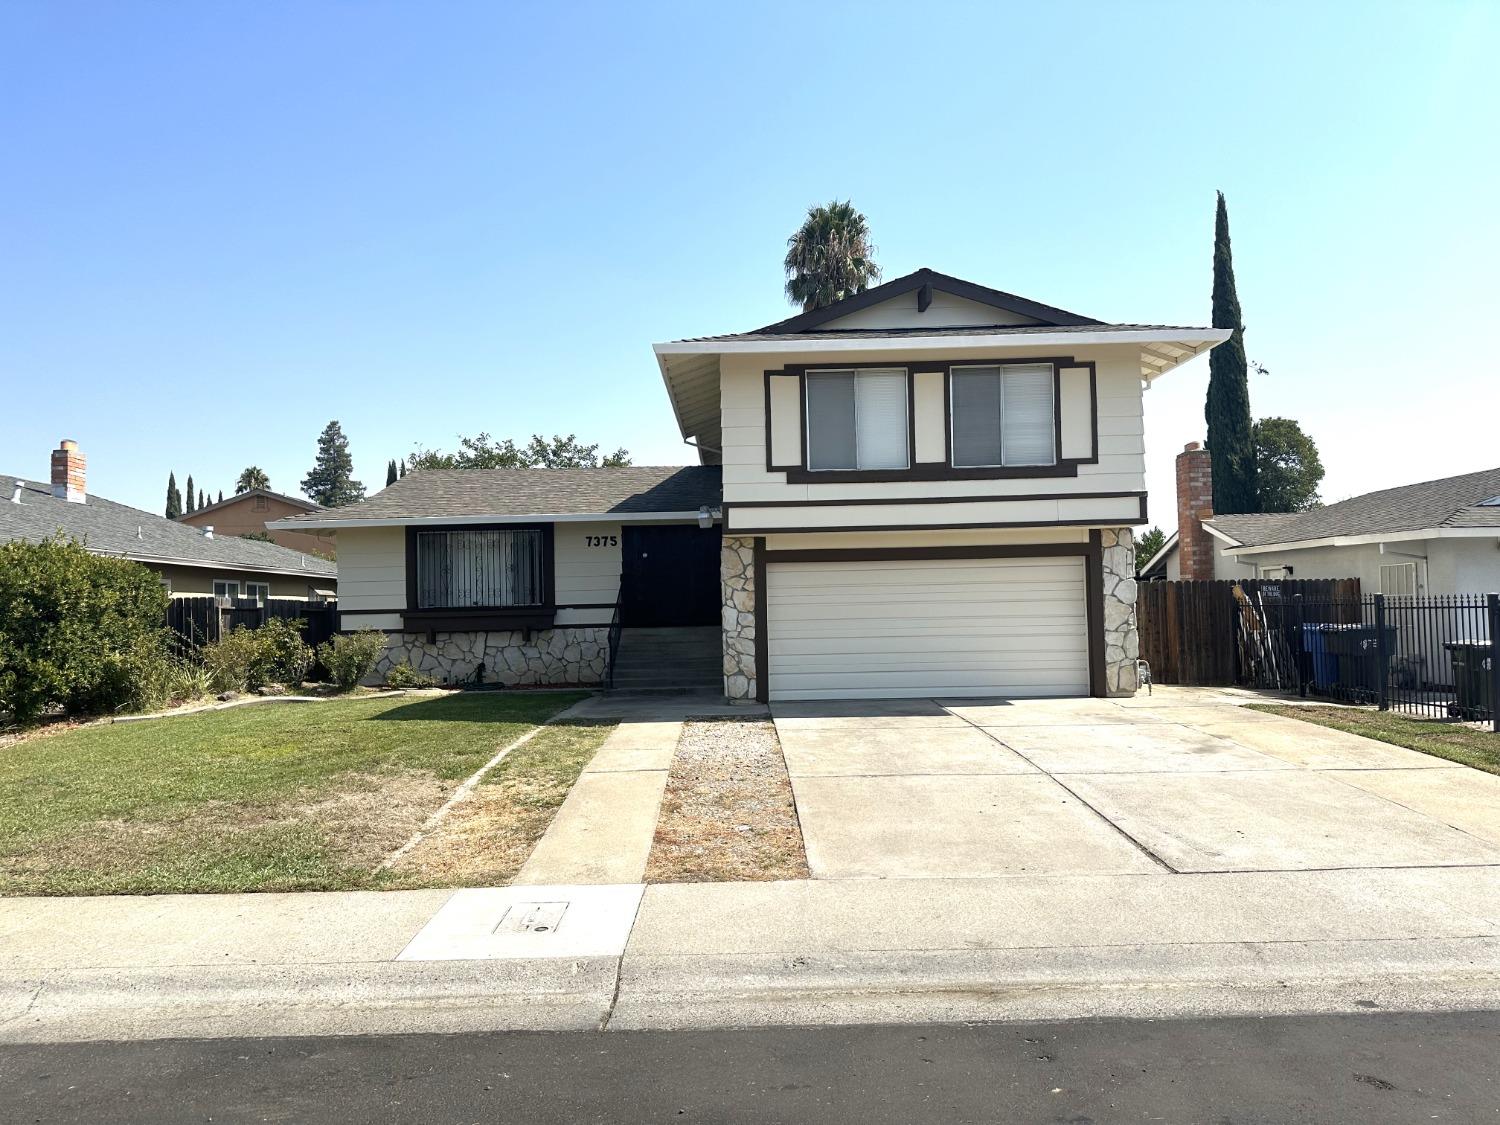 Opportunity Knocks!  This  spacious 4-bedroom home  is the least expensive 4-bedroom home in the 958